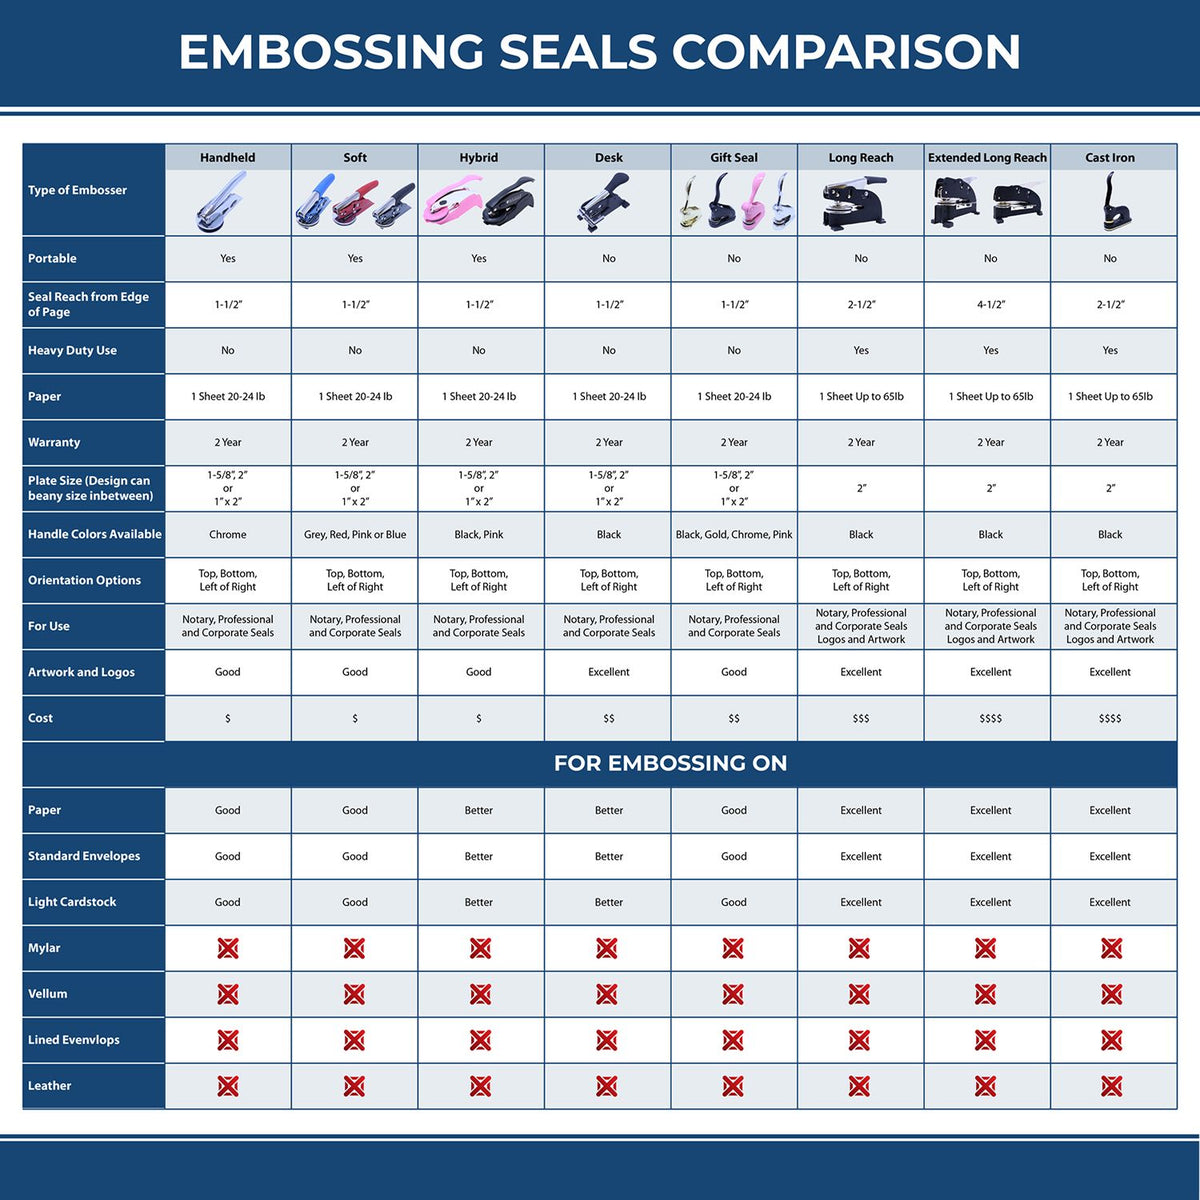 A comparison chart for the different types of mount models available for the Heavy Duty Cast Iron Mississippi Architect Embosser.